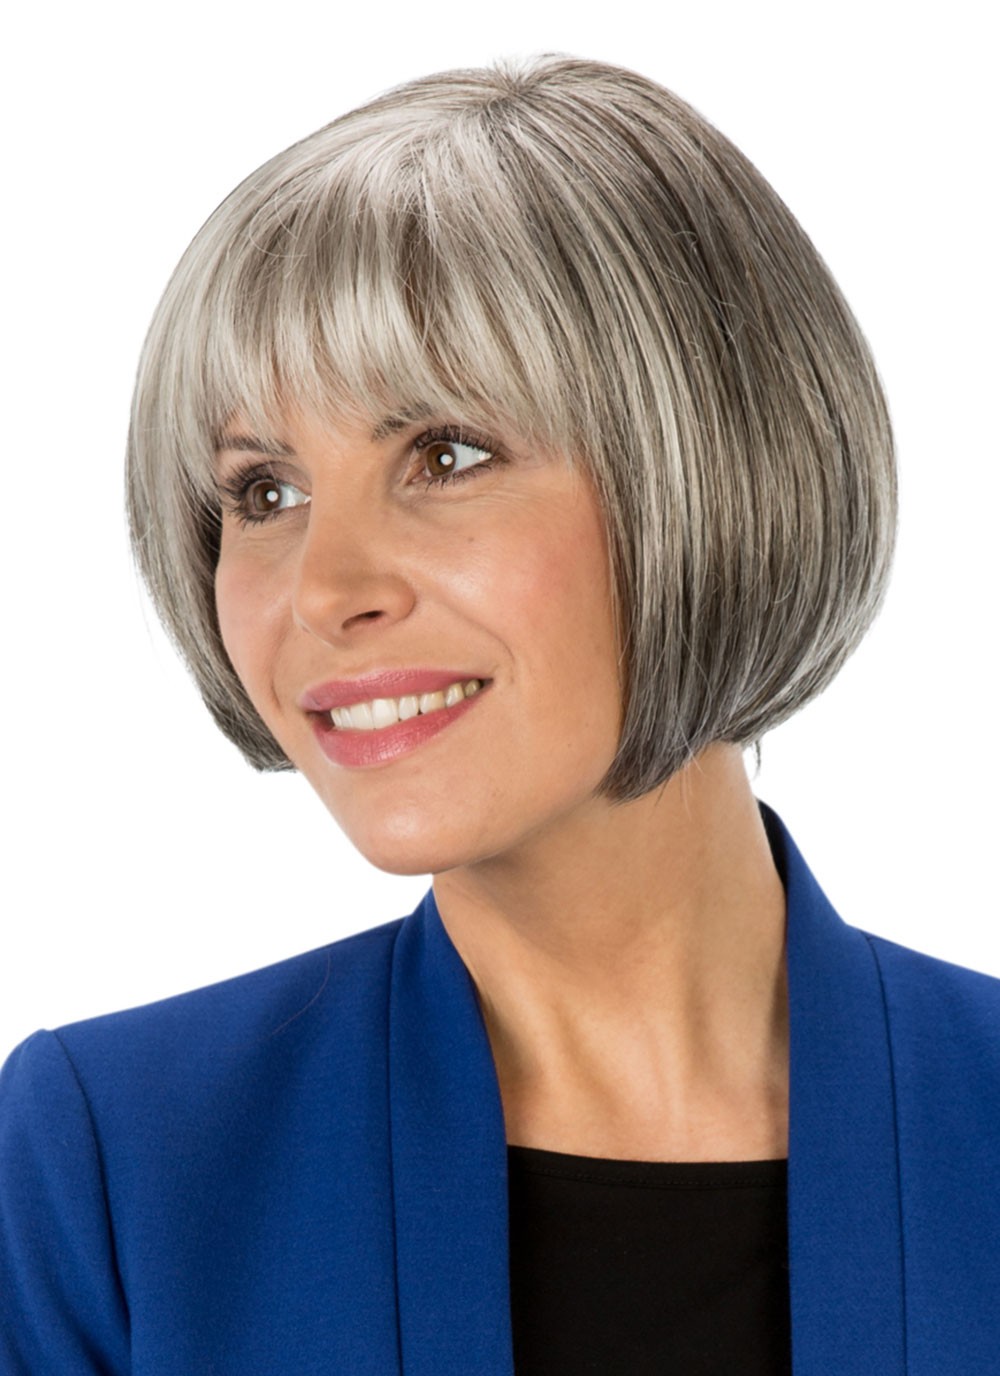 Classic Chin Length Salt and Pepper Bob Wig with Full Bangs, Chin